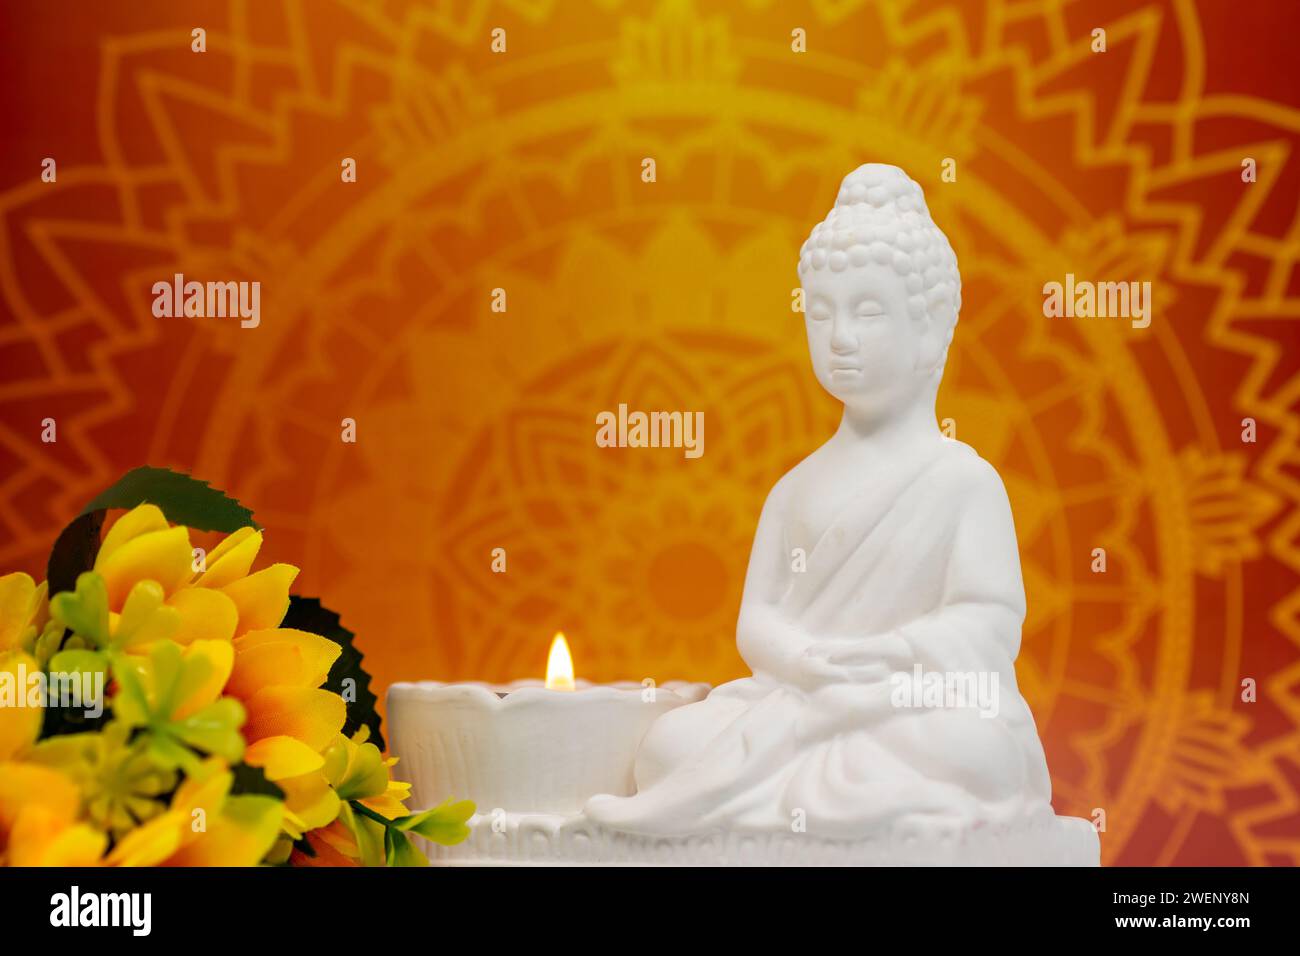 Close up of white marble figurine of Siddhartha Gautama, known as Buddha, with candle burning, decorative flowers, with colorful colorful background Stock Photo